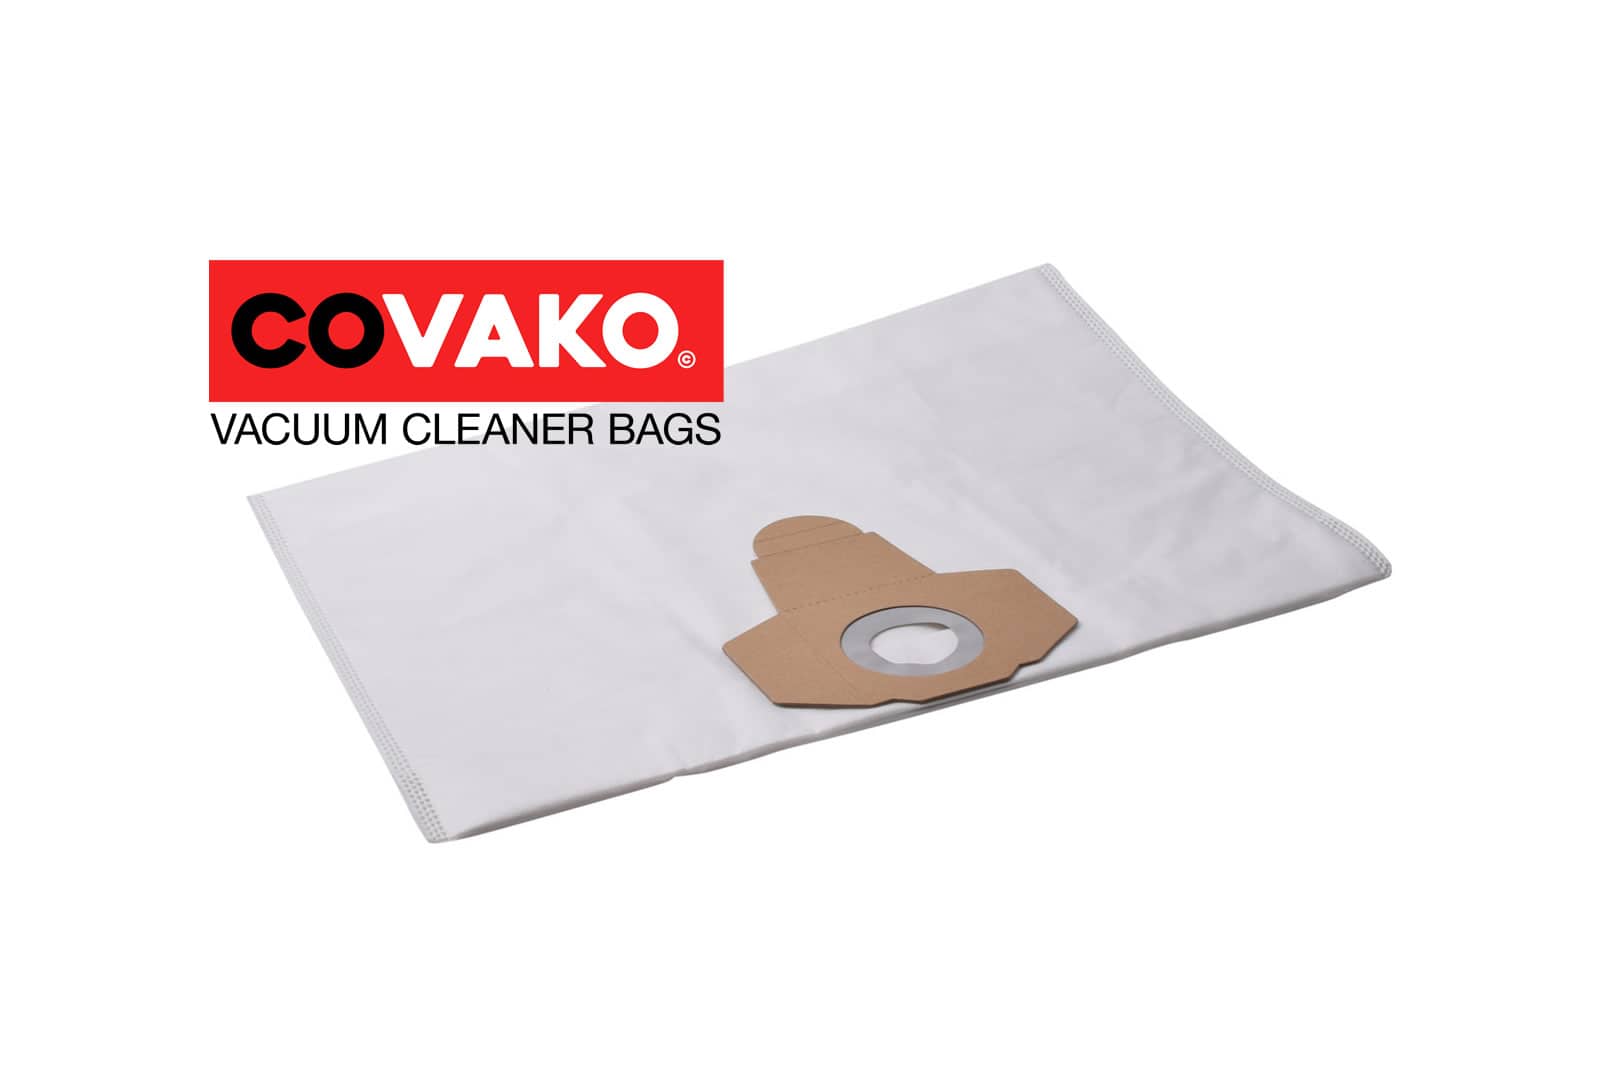 Einhell TC-VC 1820 SA / Synthesis - Einhell vacuum cleaner bags